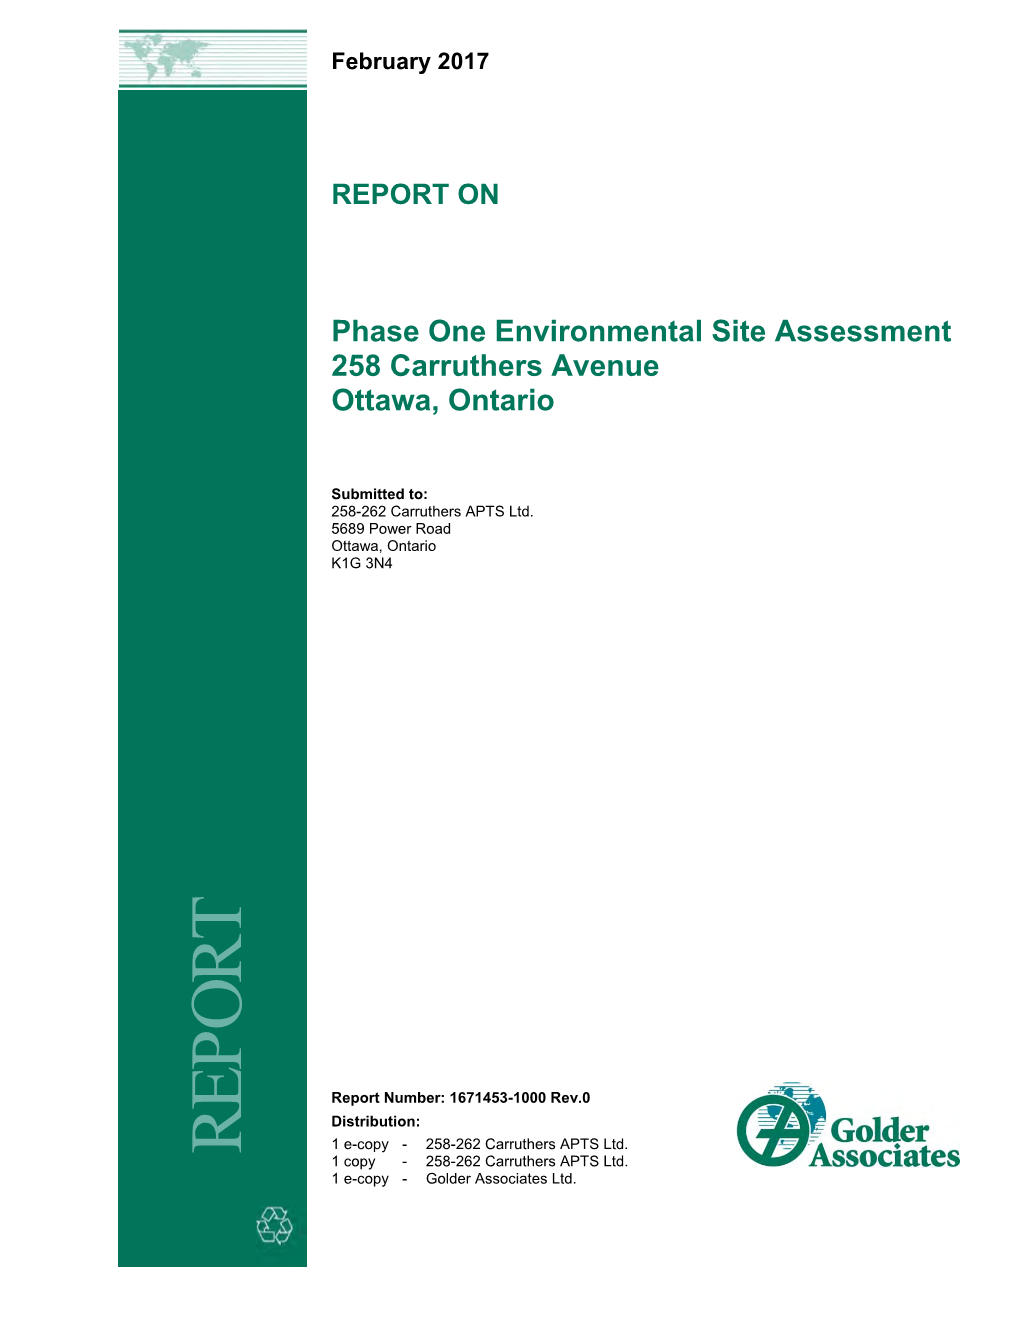 REPORT on Phase One Environmental Site Assessment